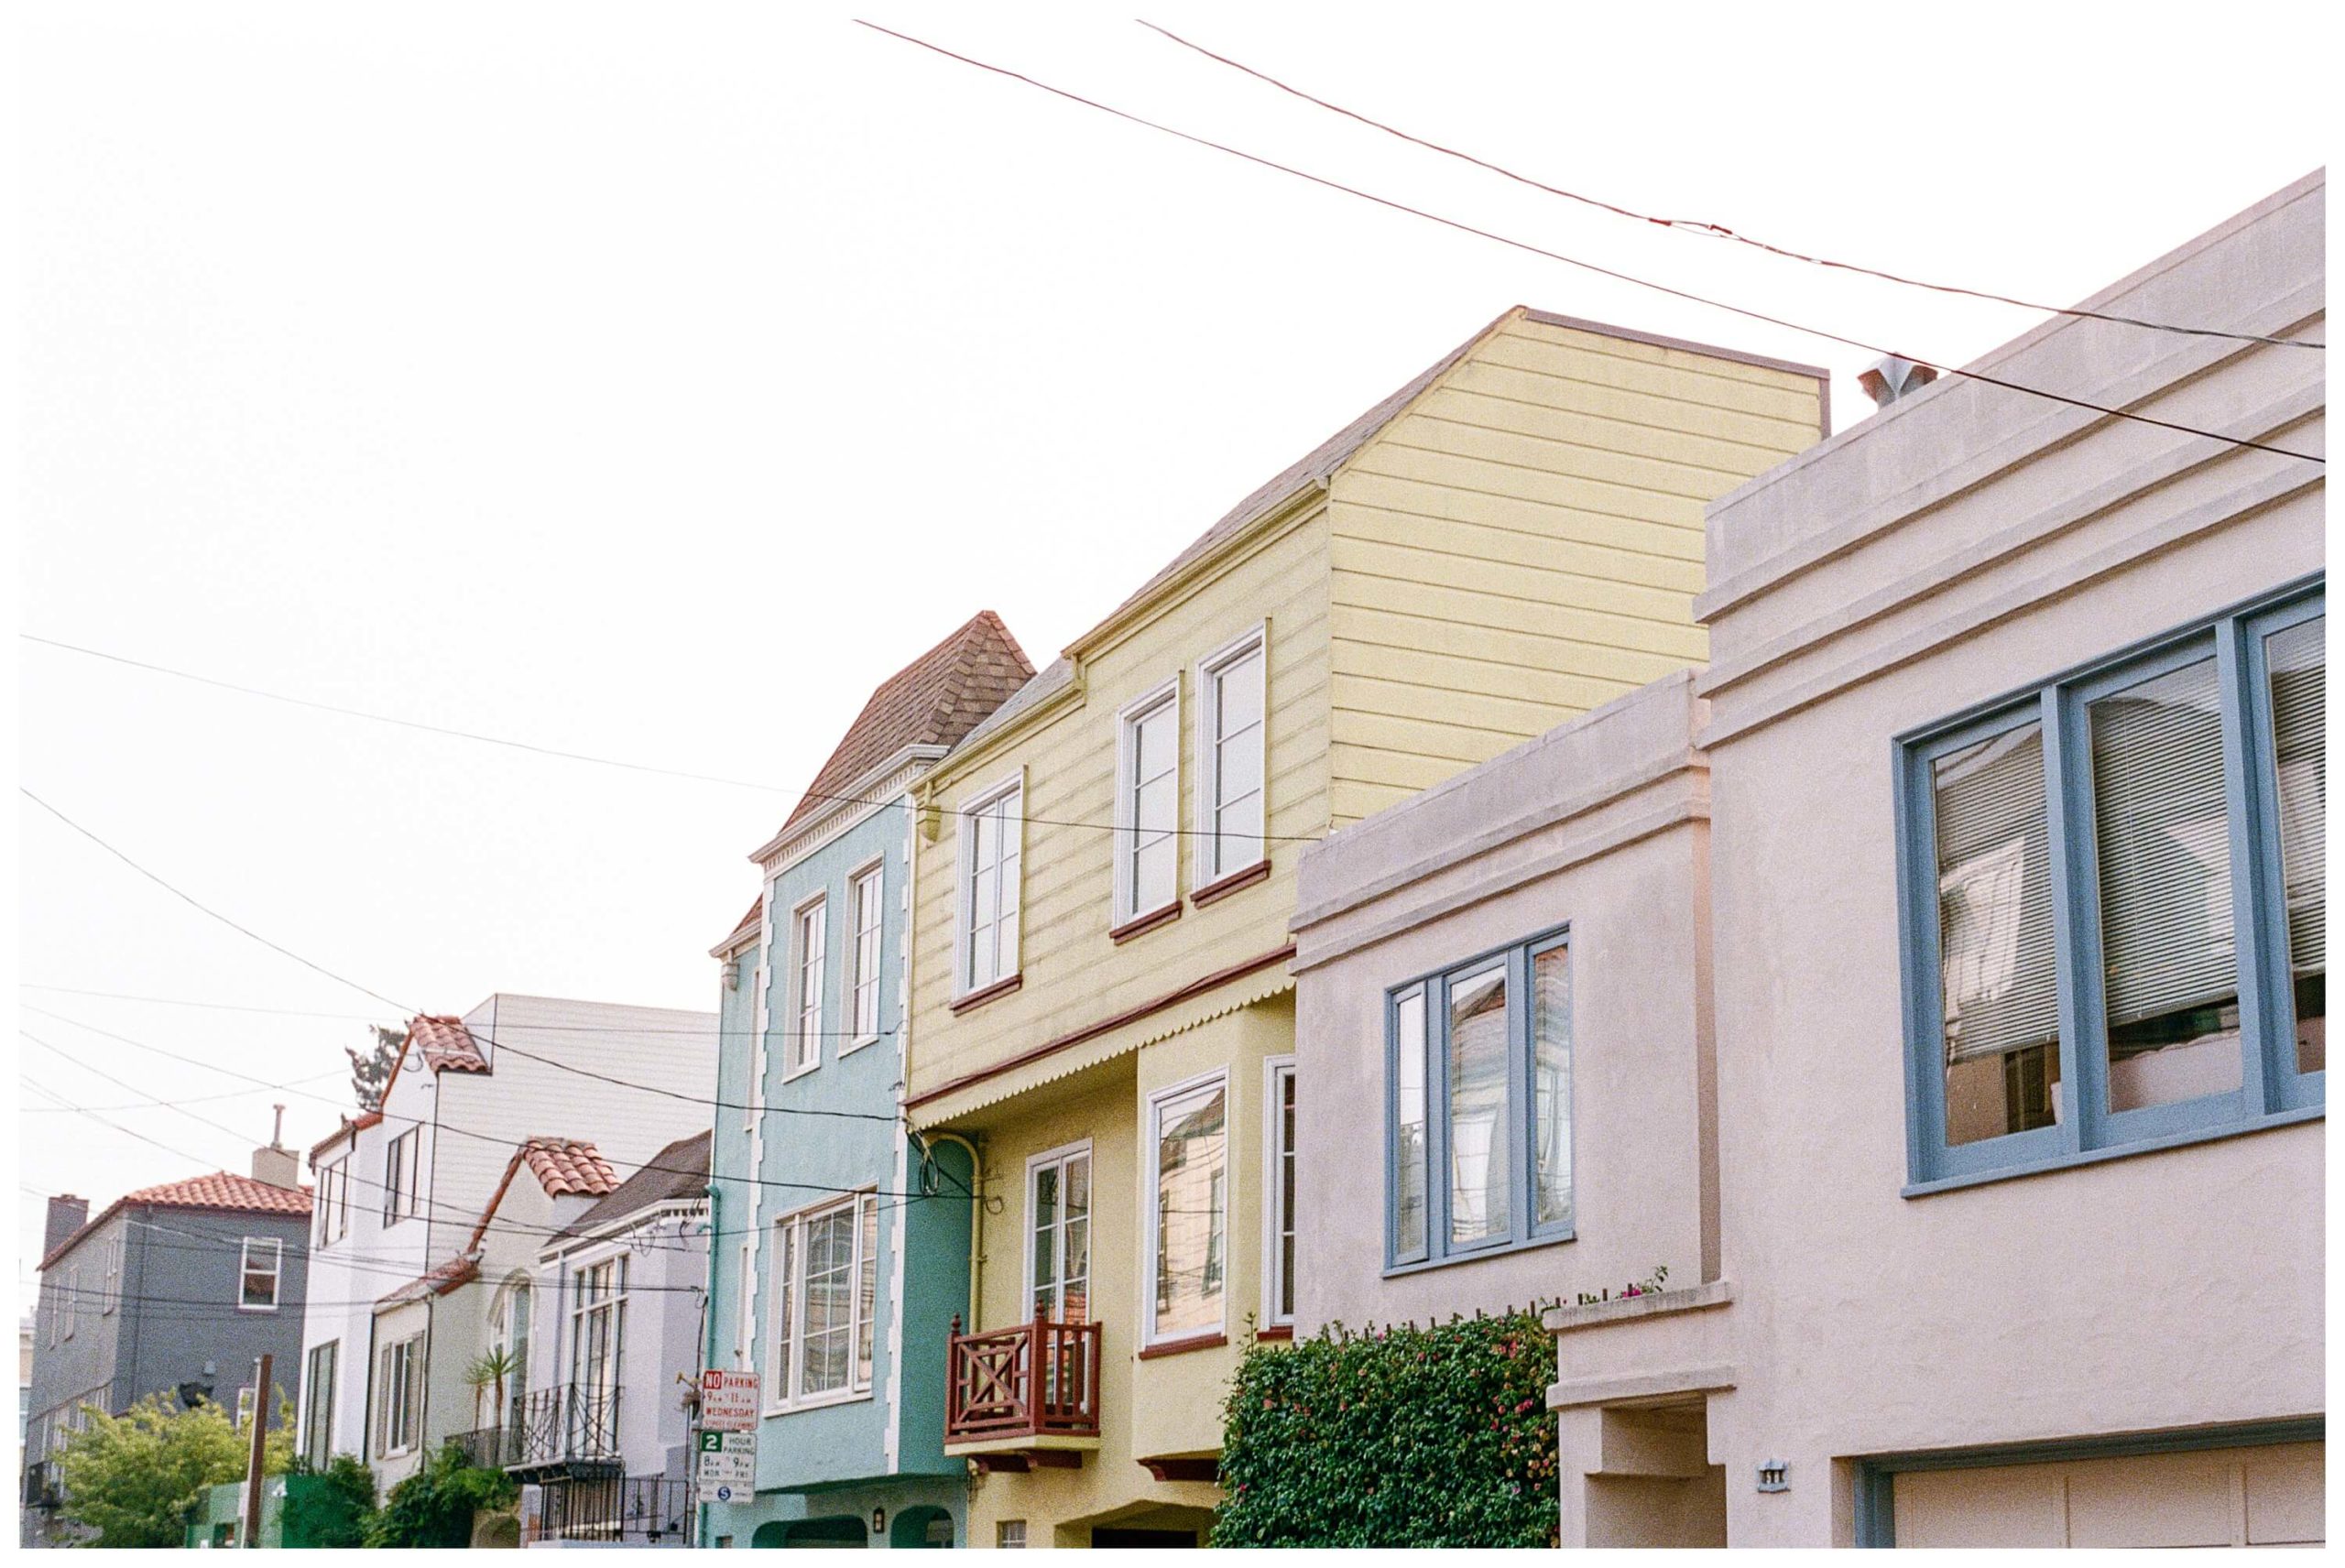 A row of colorful houses in shades or pastel pink, yellow, and blue line the street at sunset in the Mission District of San Francisco.